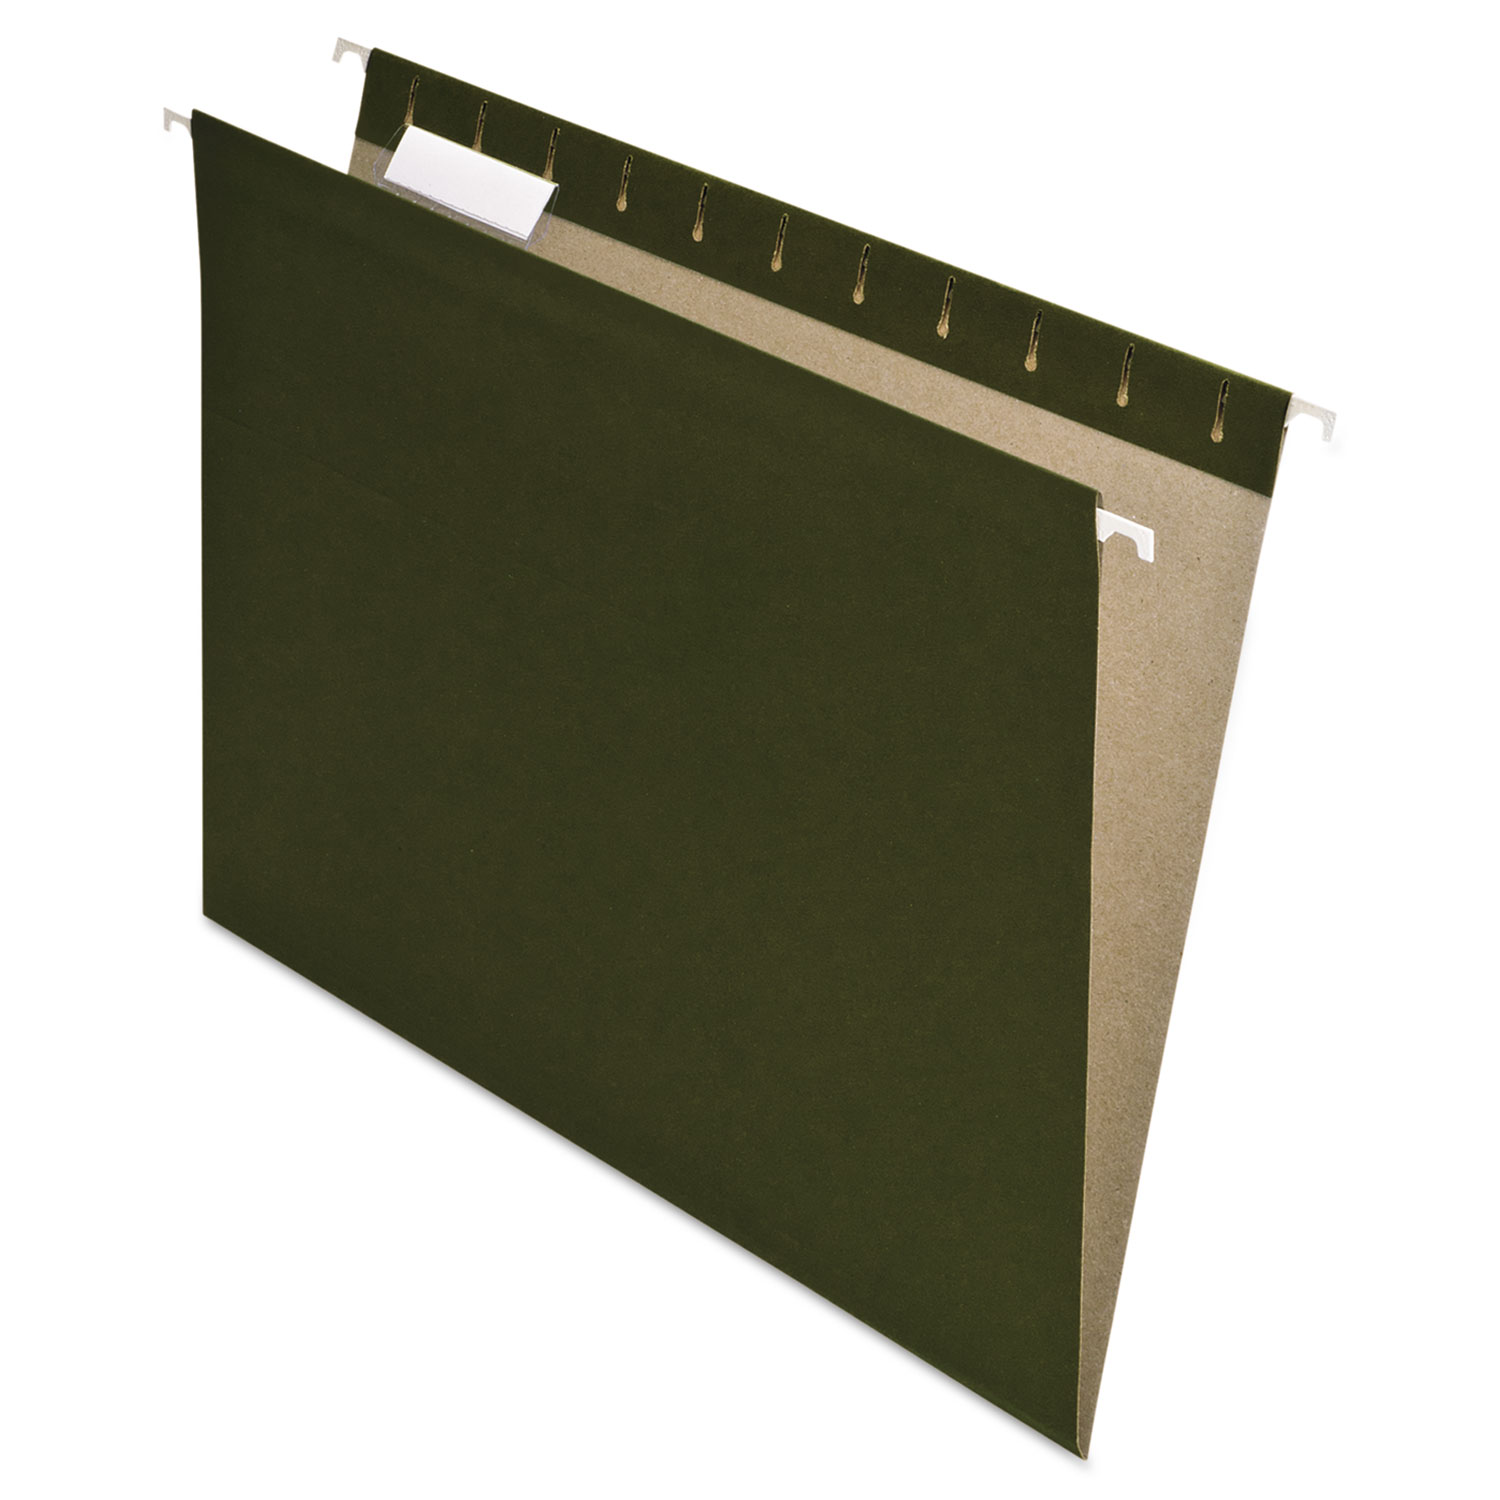 Earthwise by Pendaflex Recycled Hanging File Folder, 1/5 Cut, Ltr, Green, 25/BX